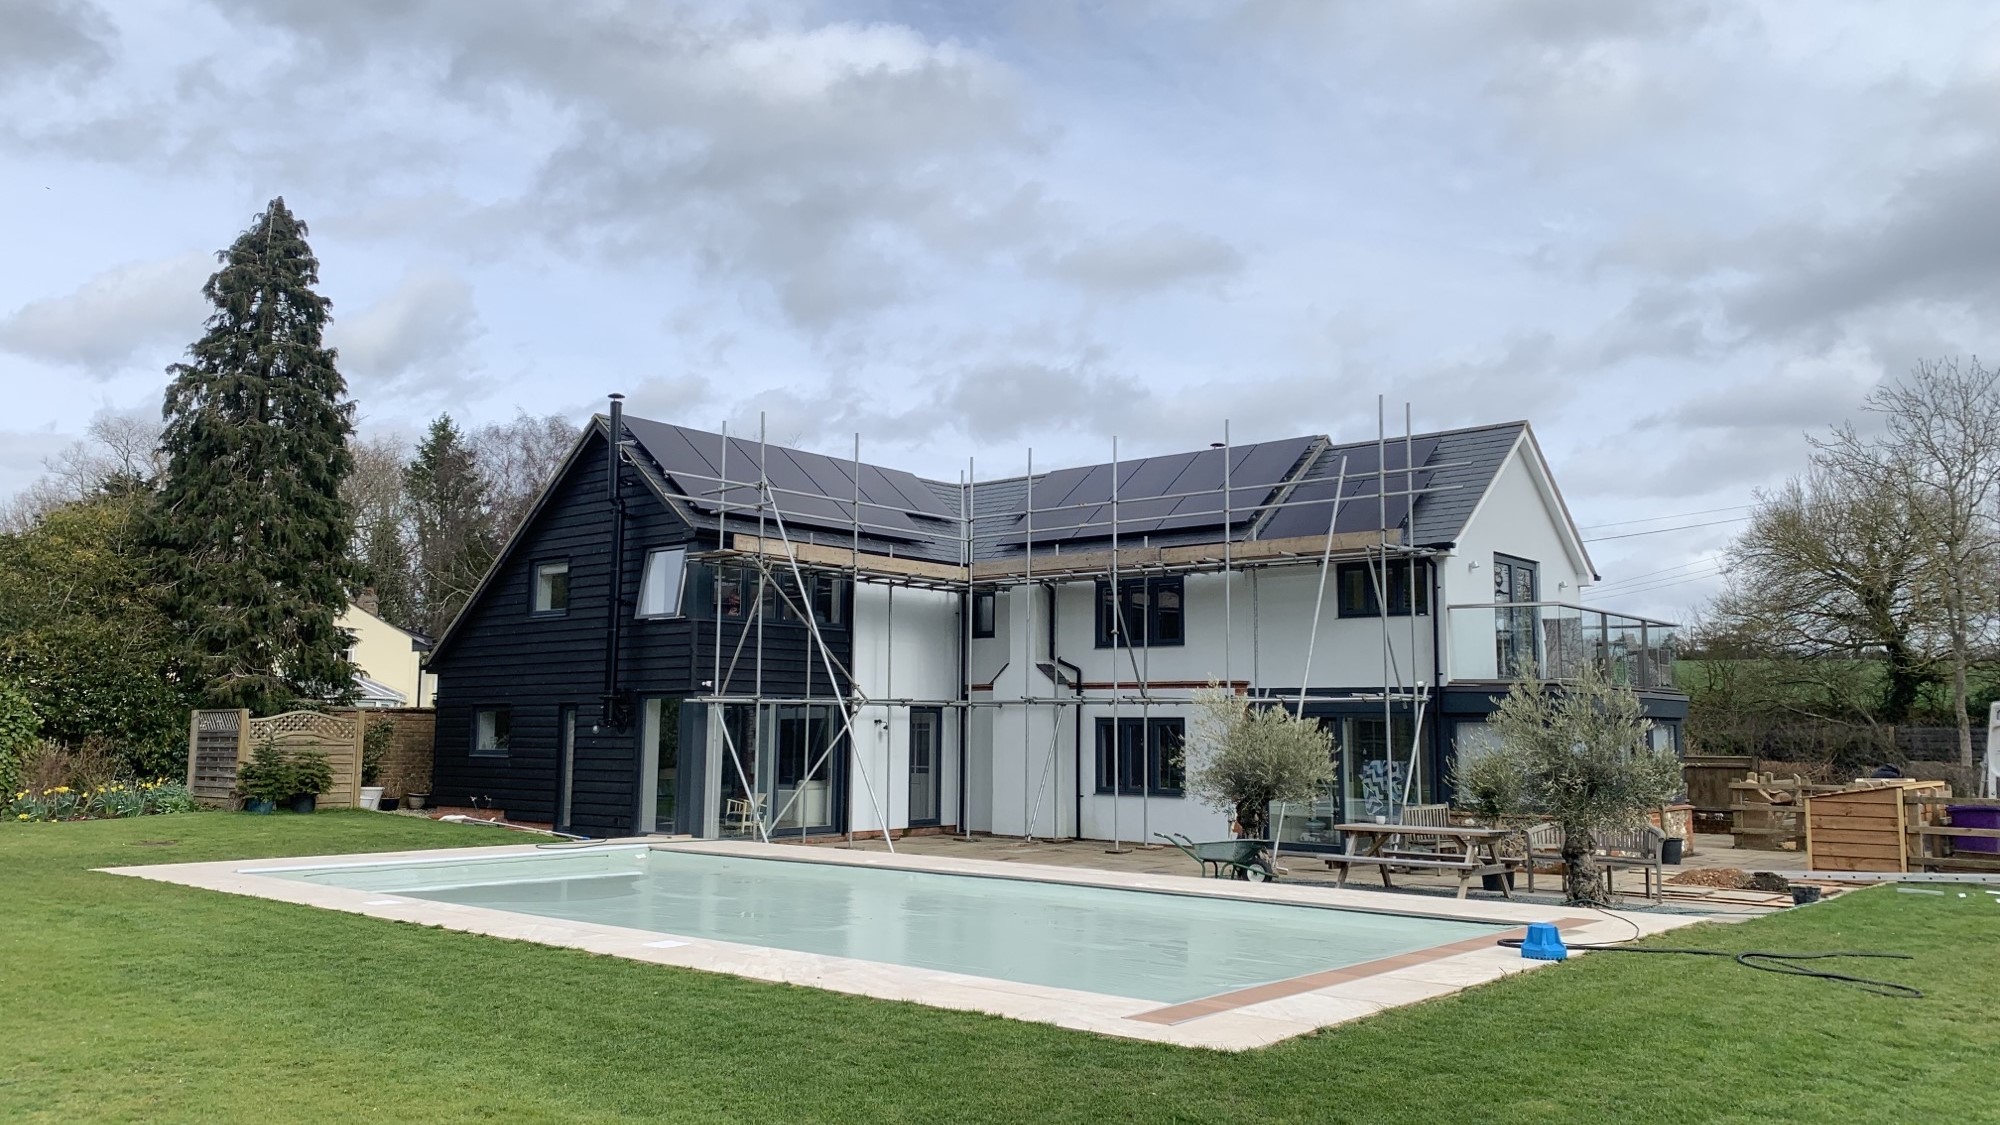 Full black solar panel installation. Roof mounted on a beautiful modern countryside home